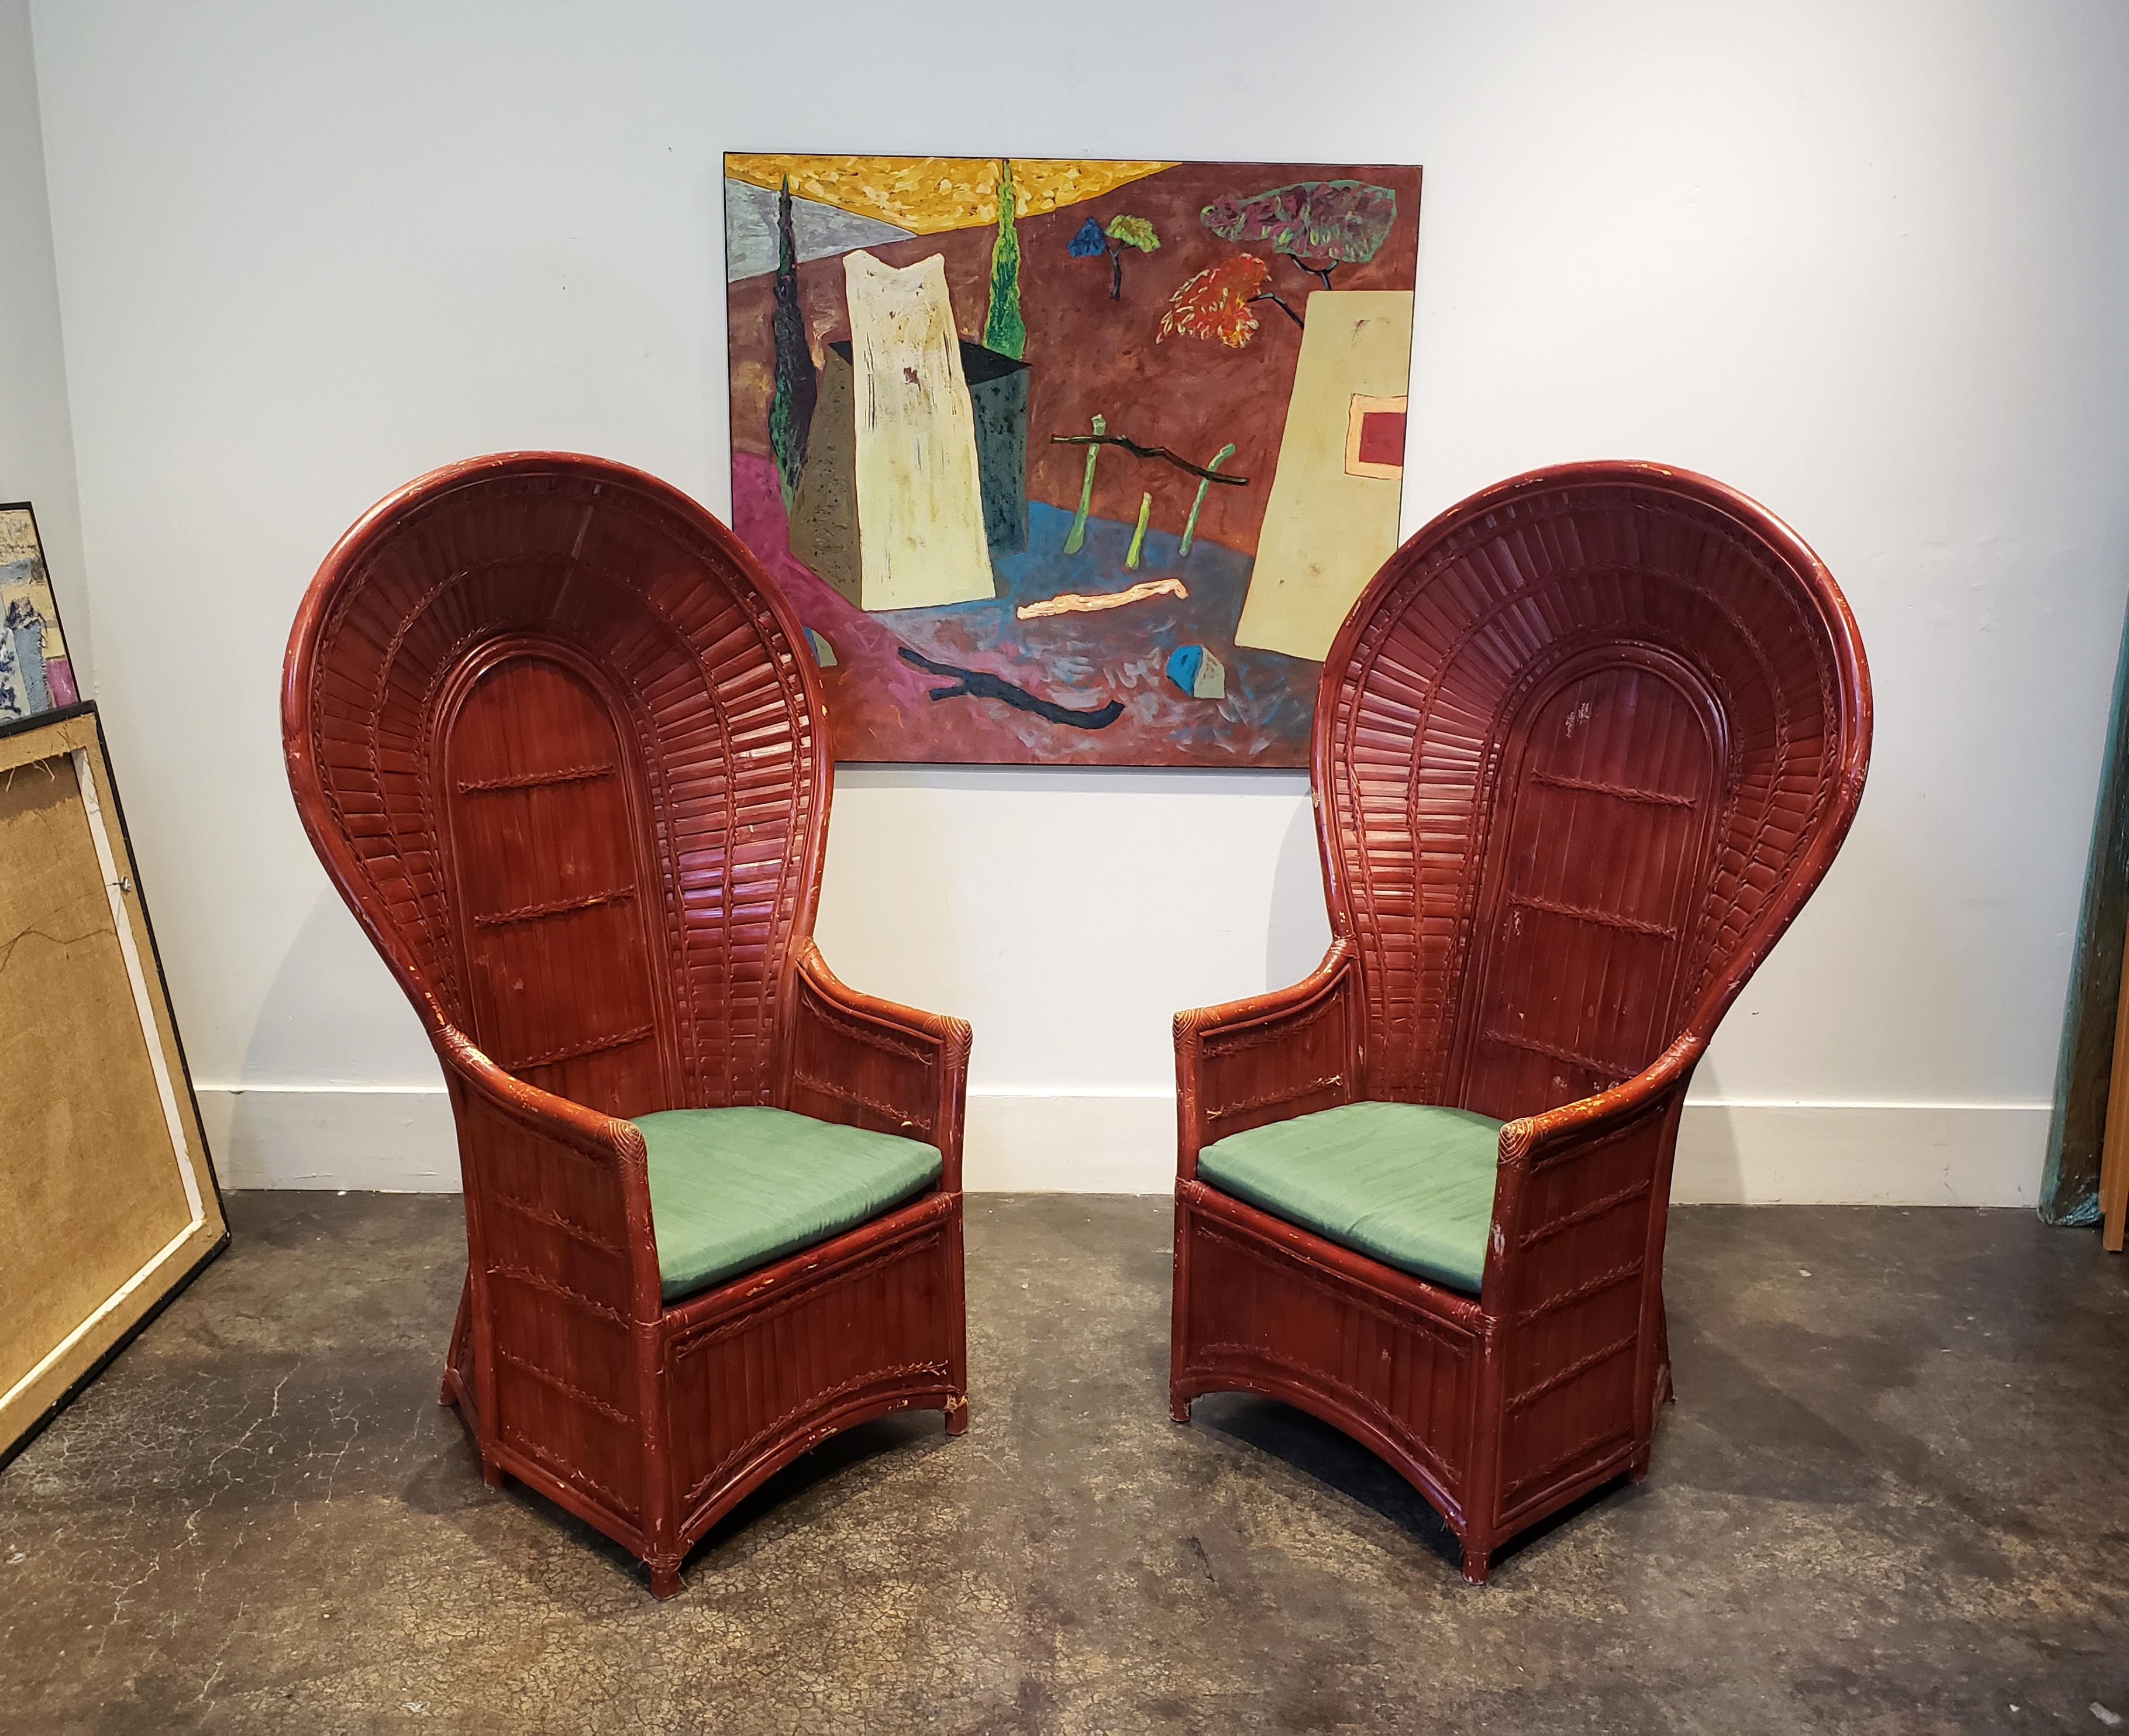 Pair of 1960s-1970s amazingly crafted rattan and bamboo peacock chairs. Vintage oxblood red-paint job has beautiful worn-in patina. Chairs come with two emerald green cushions.
 